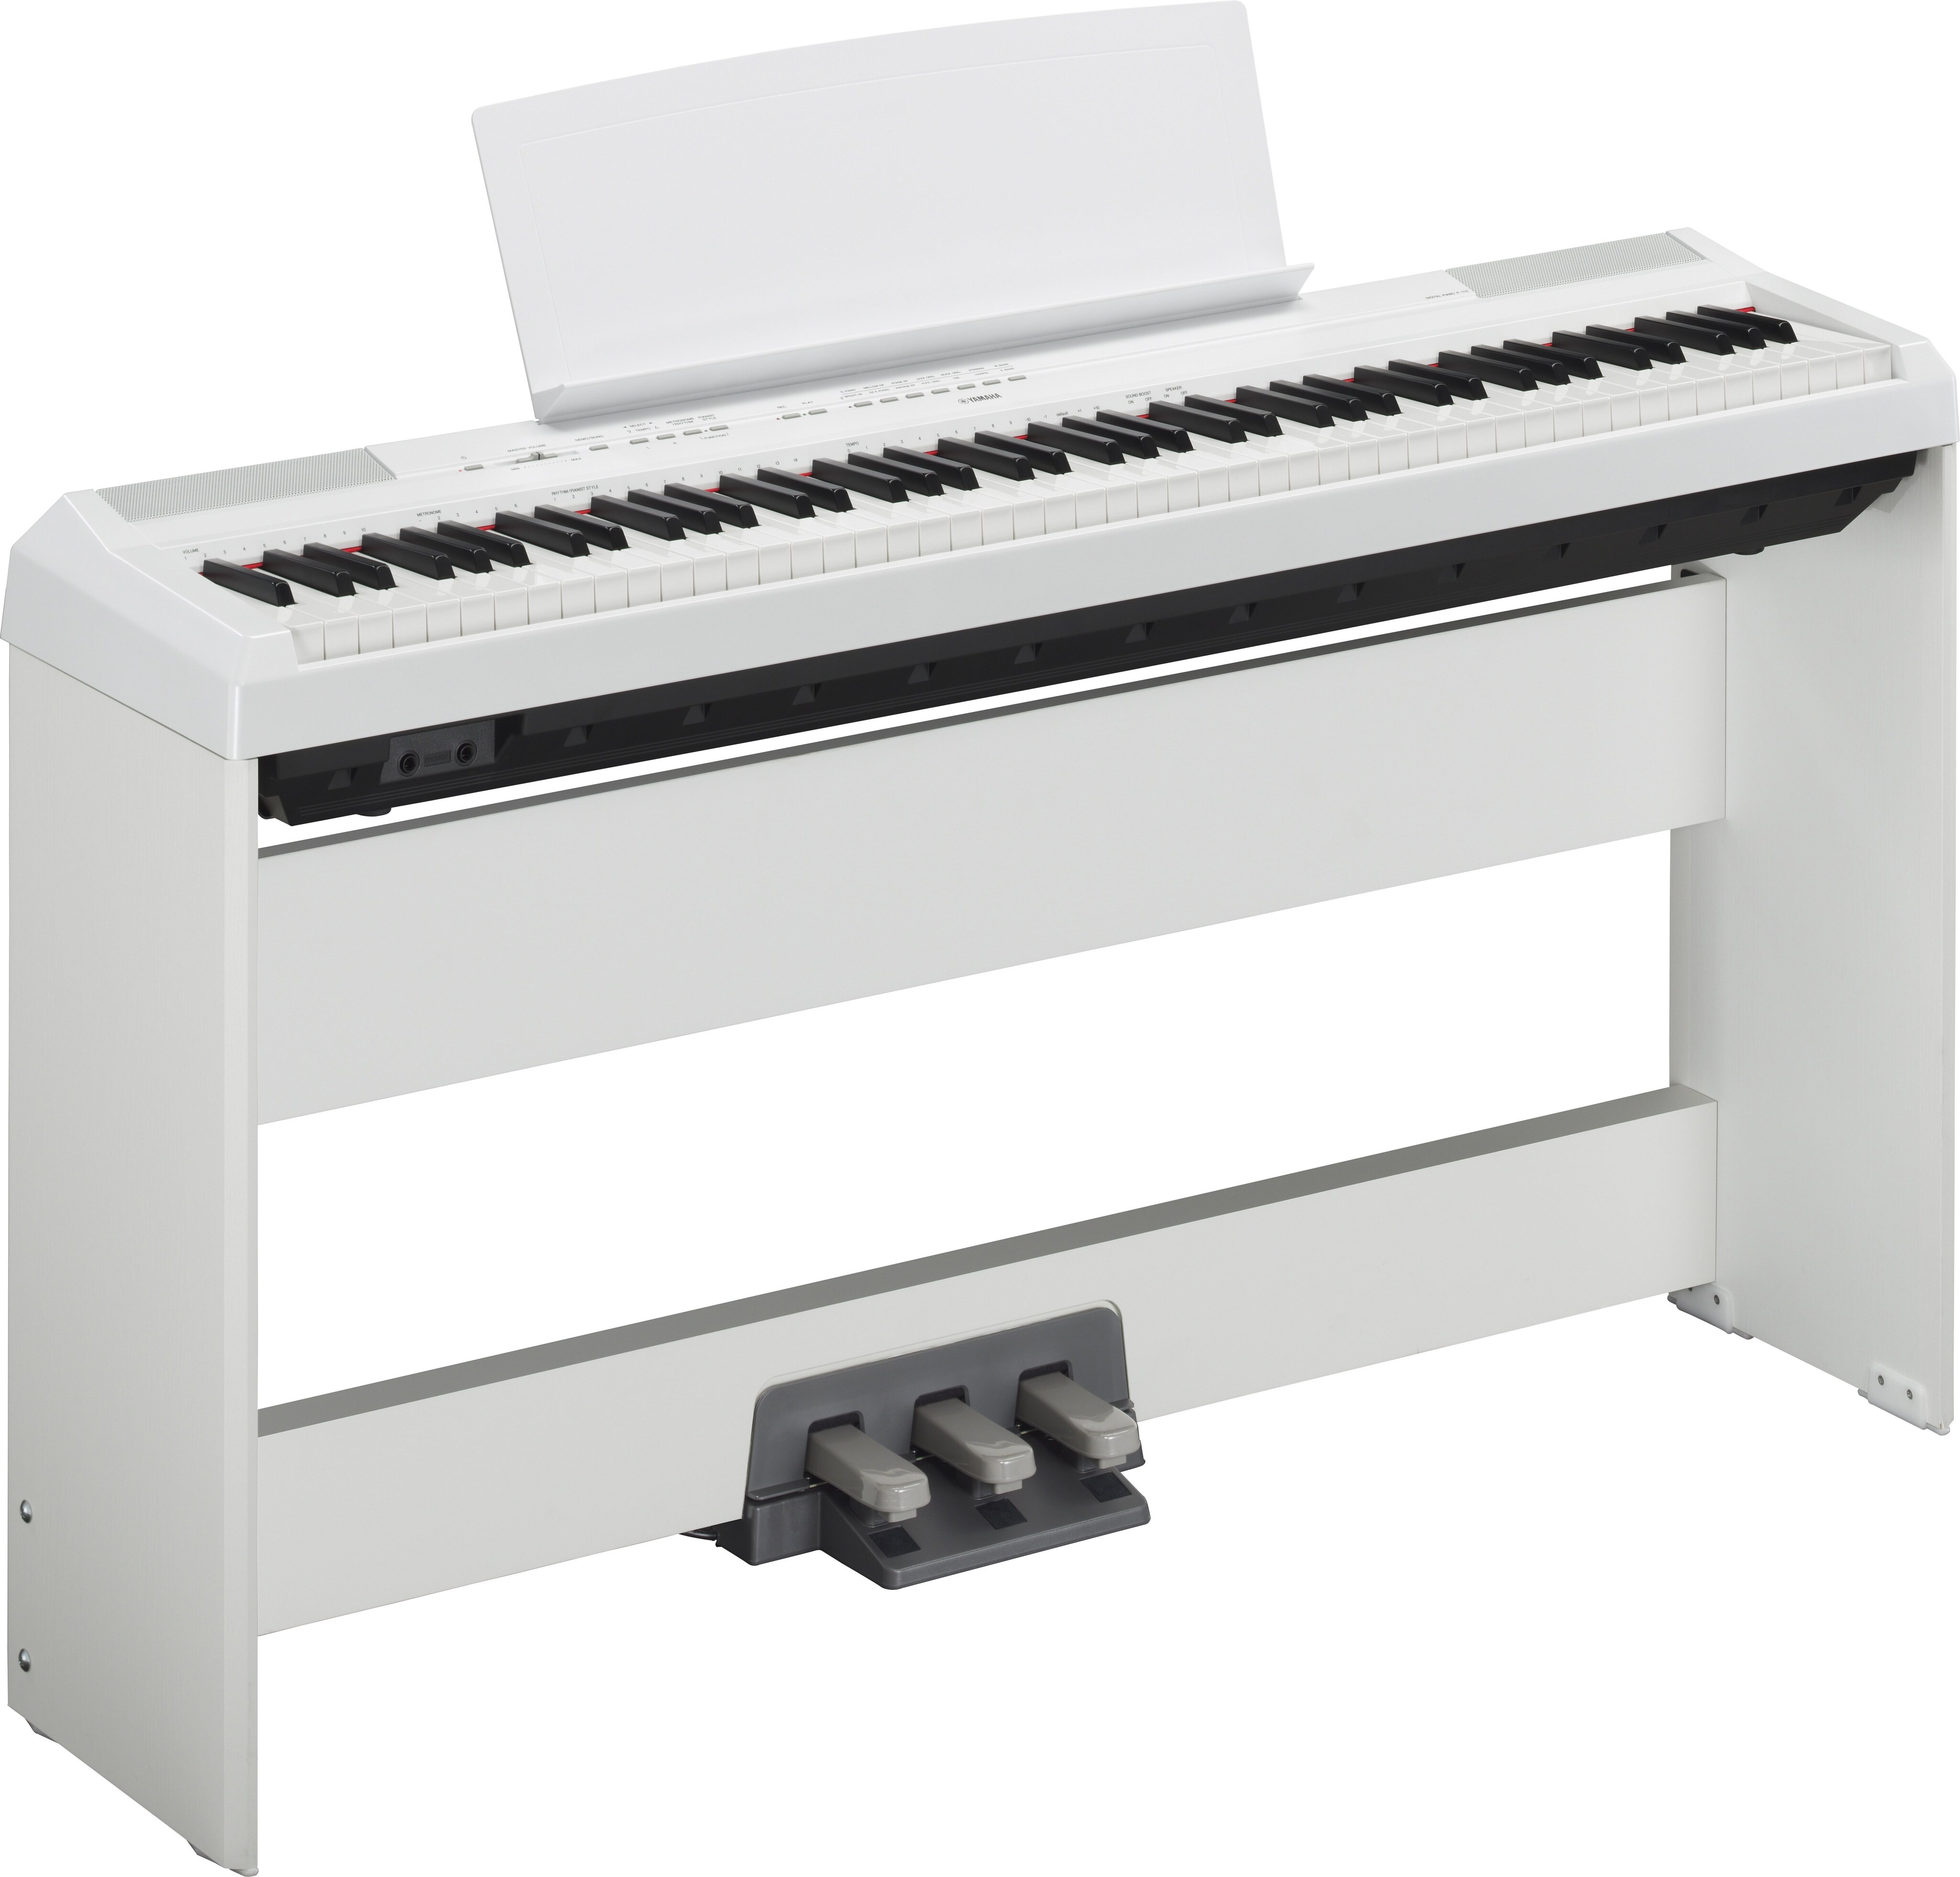 P-115 - Overview - P Series - Pianos - Musical Instruments 